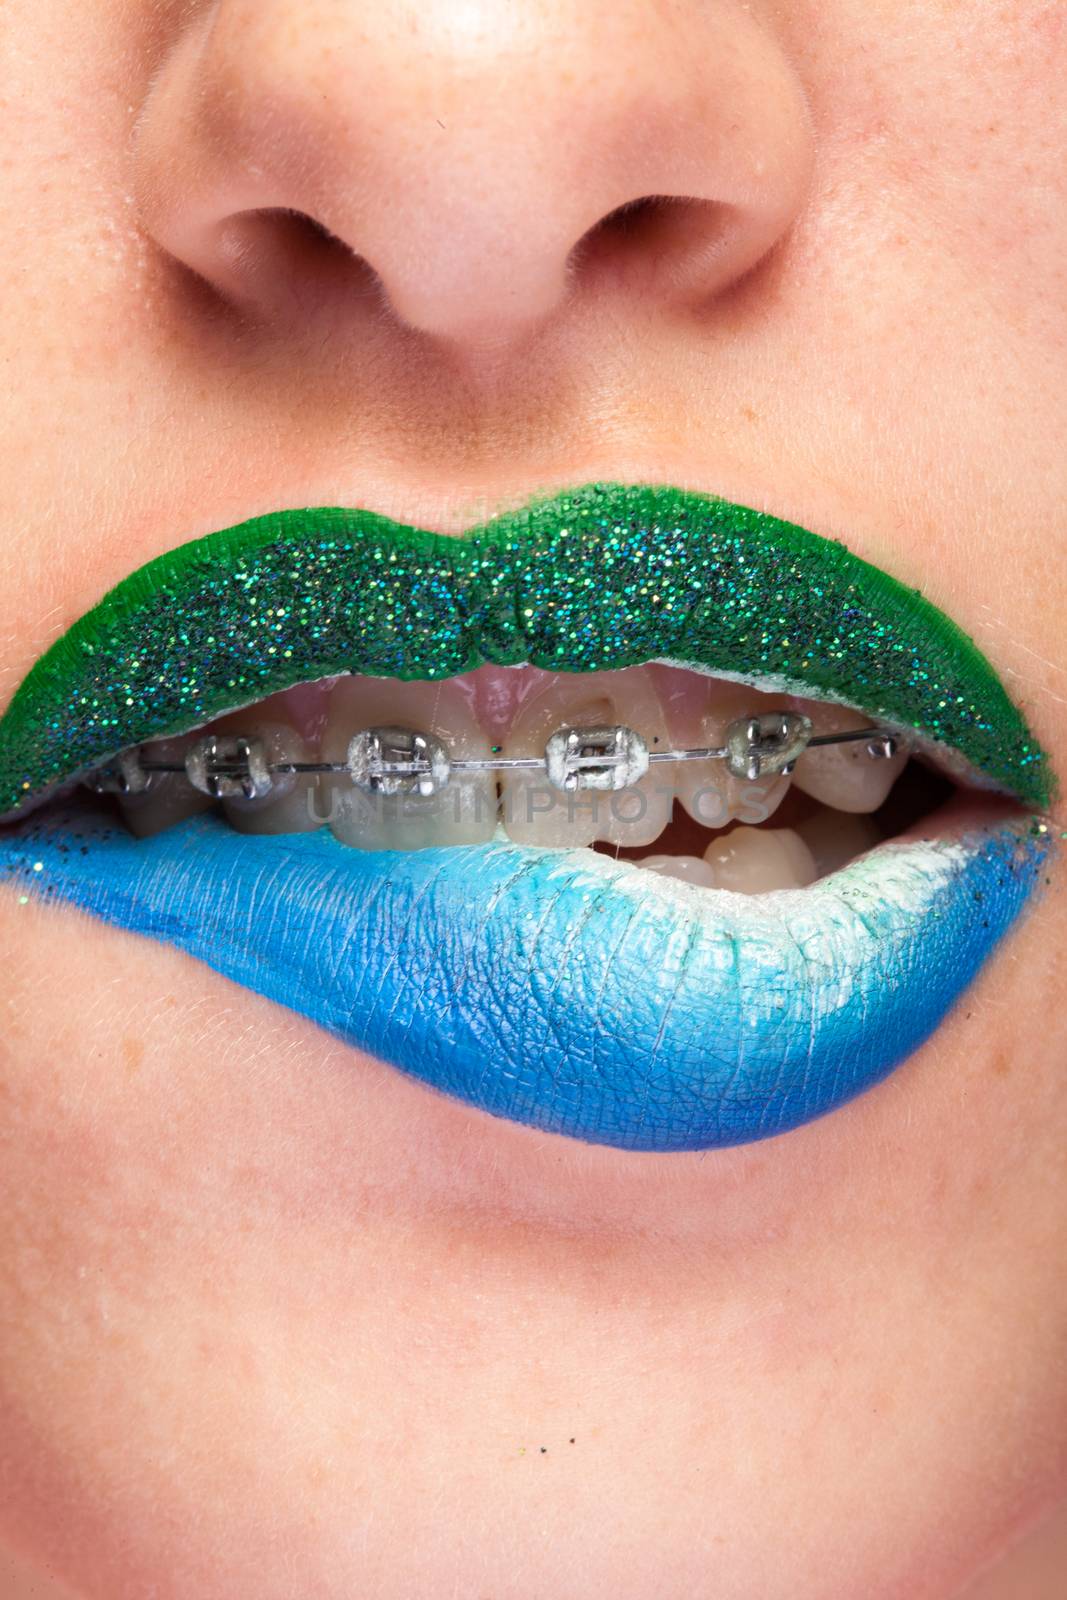 Beauty image of lips with artistic make up by DCStudio